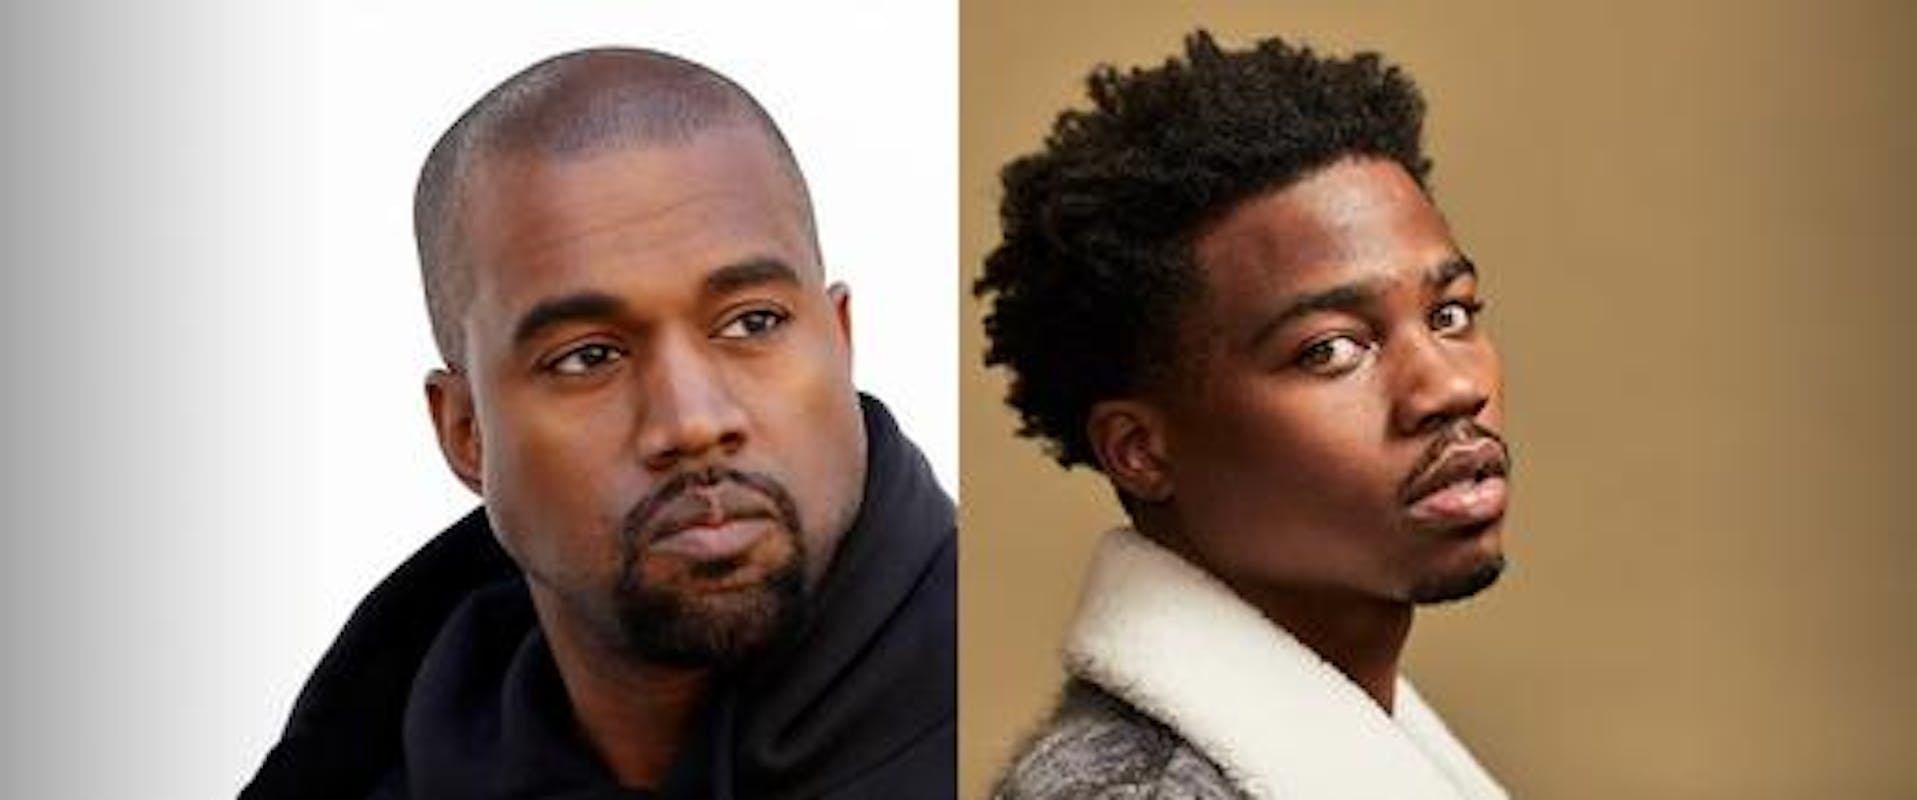 Kanye West and Roddy Ricch Tease Collab